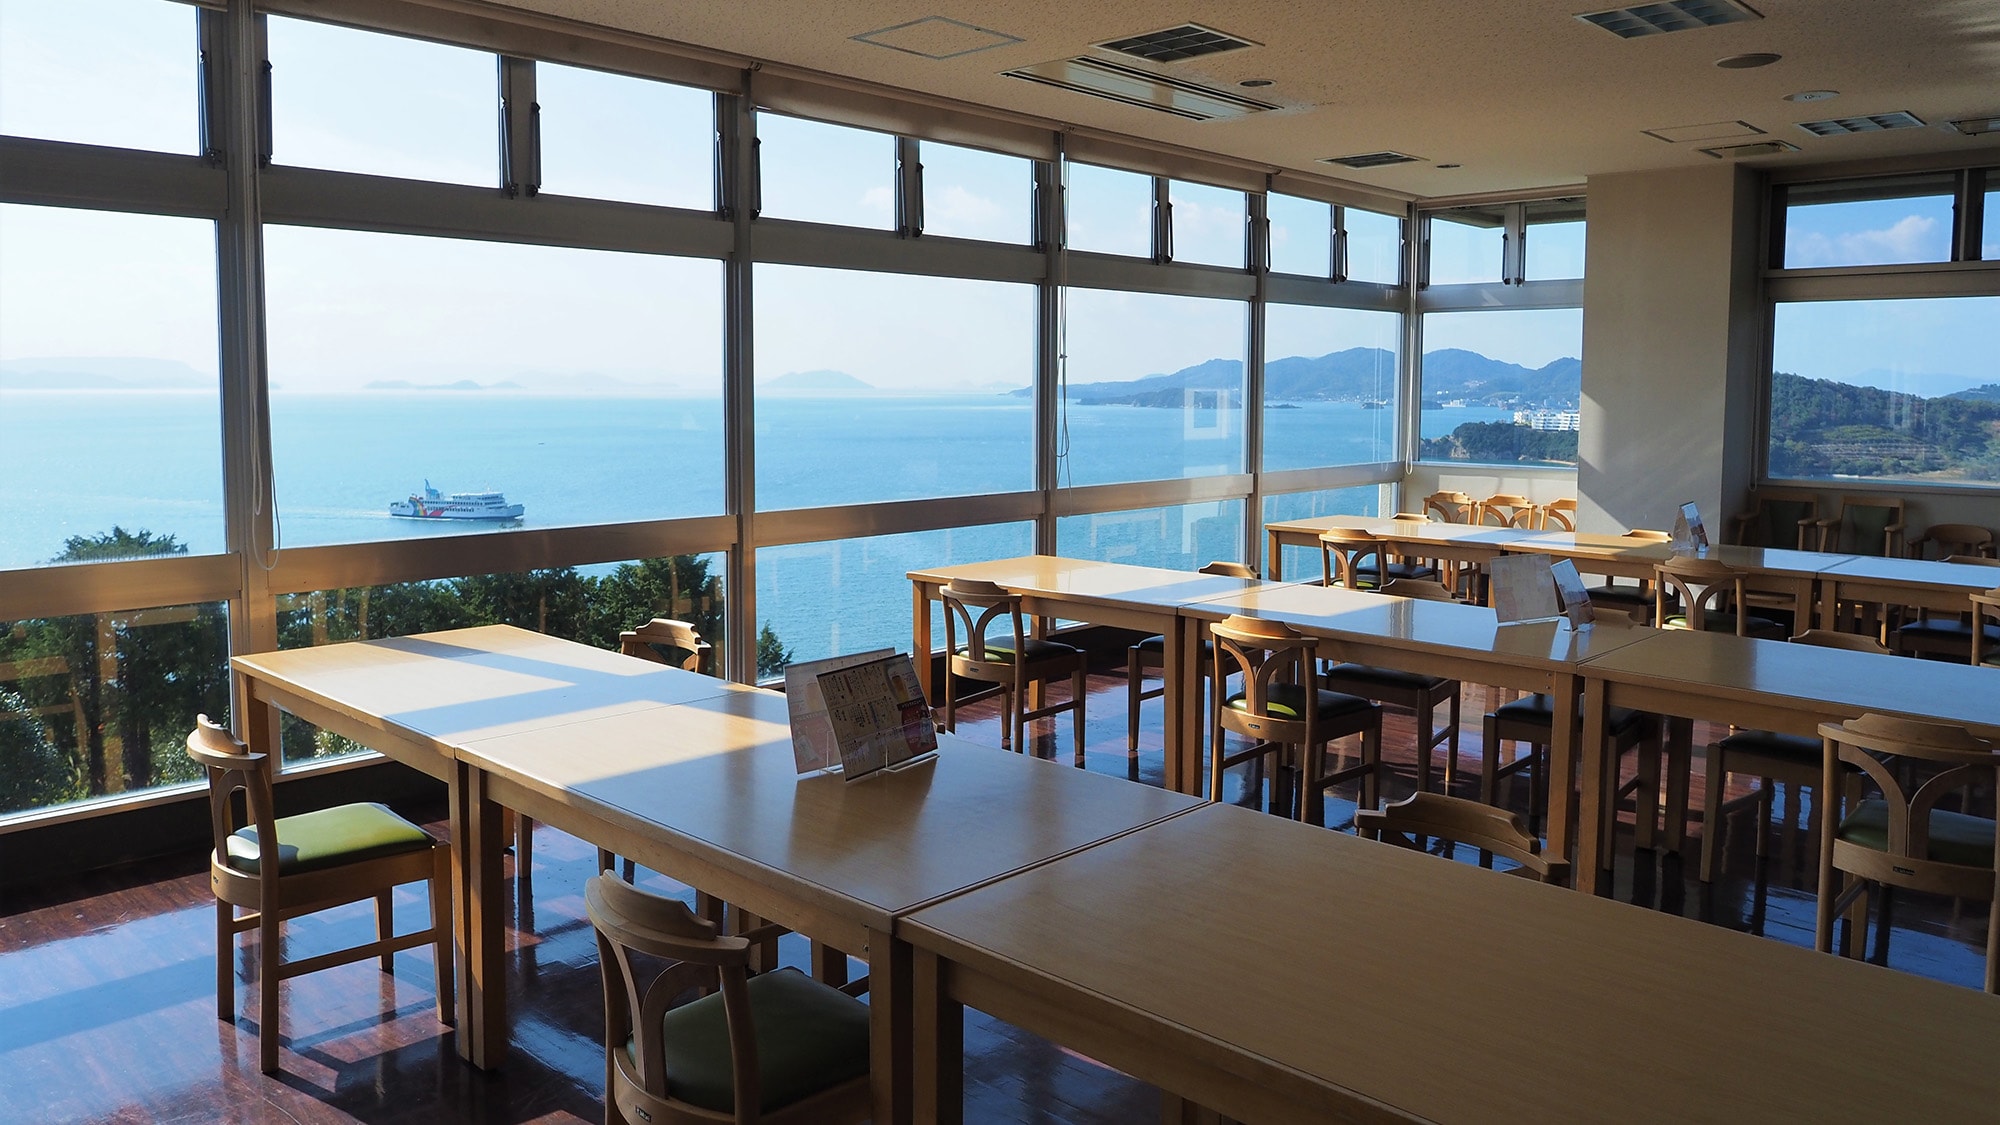 Restaurant with a view of the sea